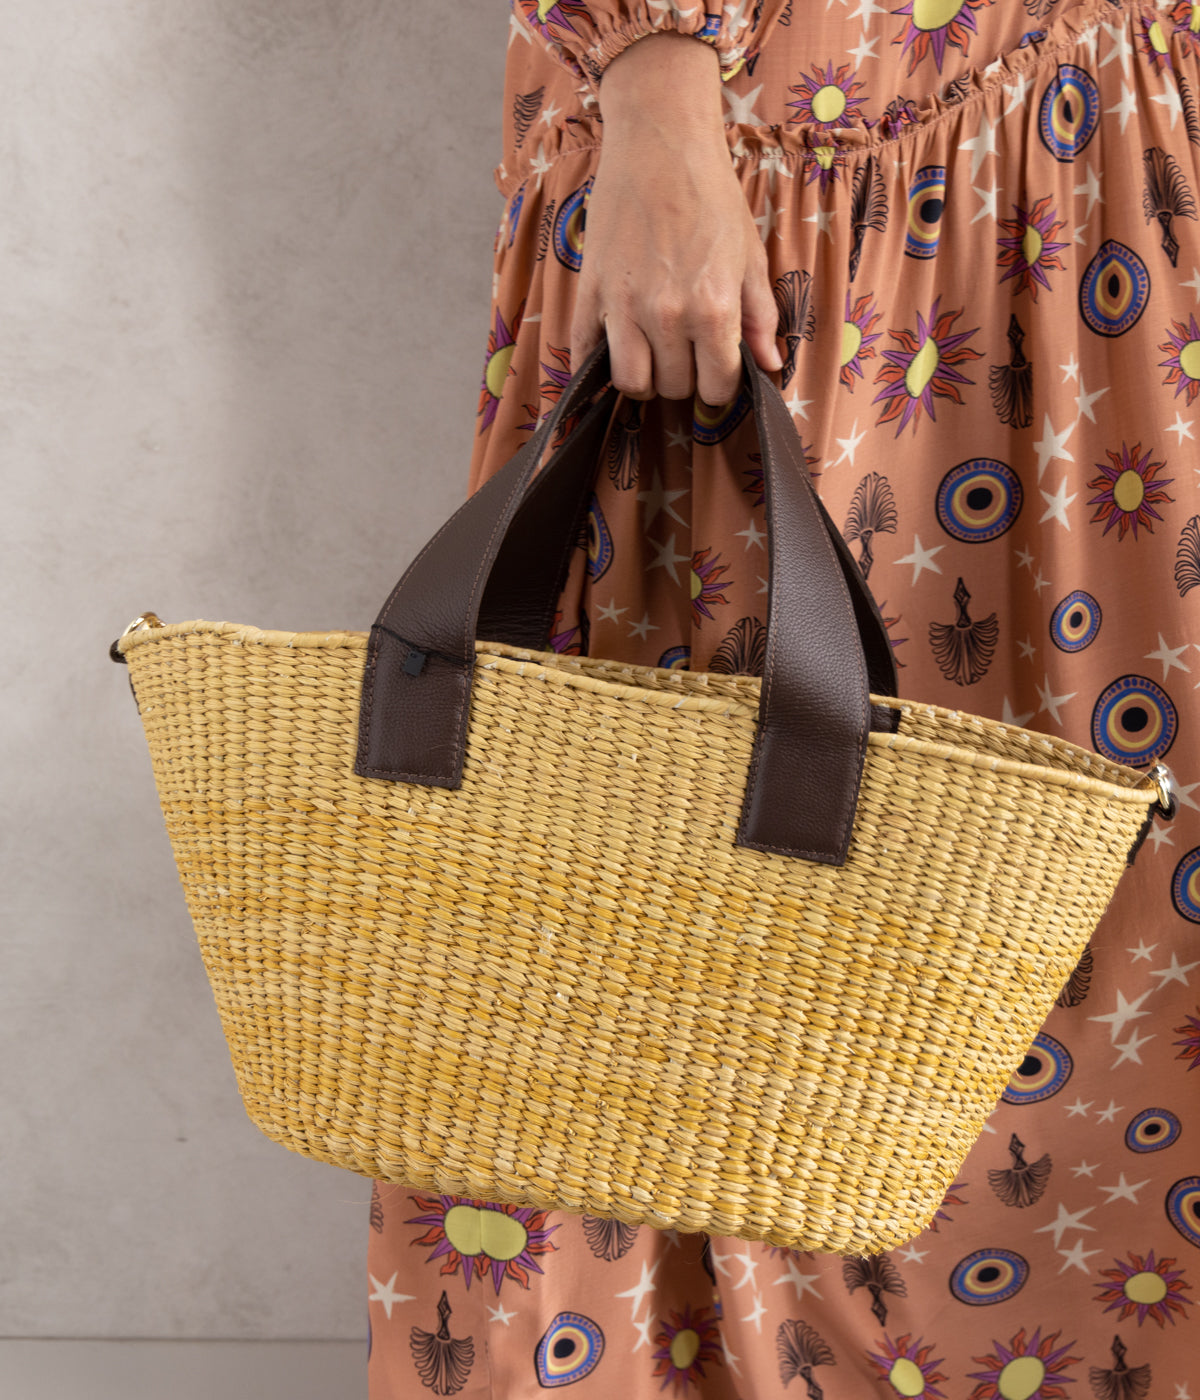 Maxi Canasta Straw Bag with Leather Handles in Beige & Chocolate